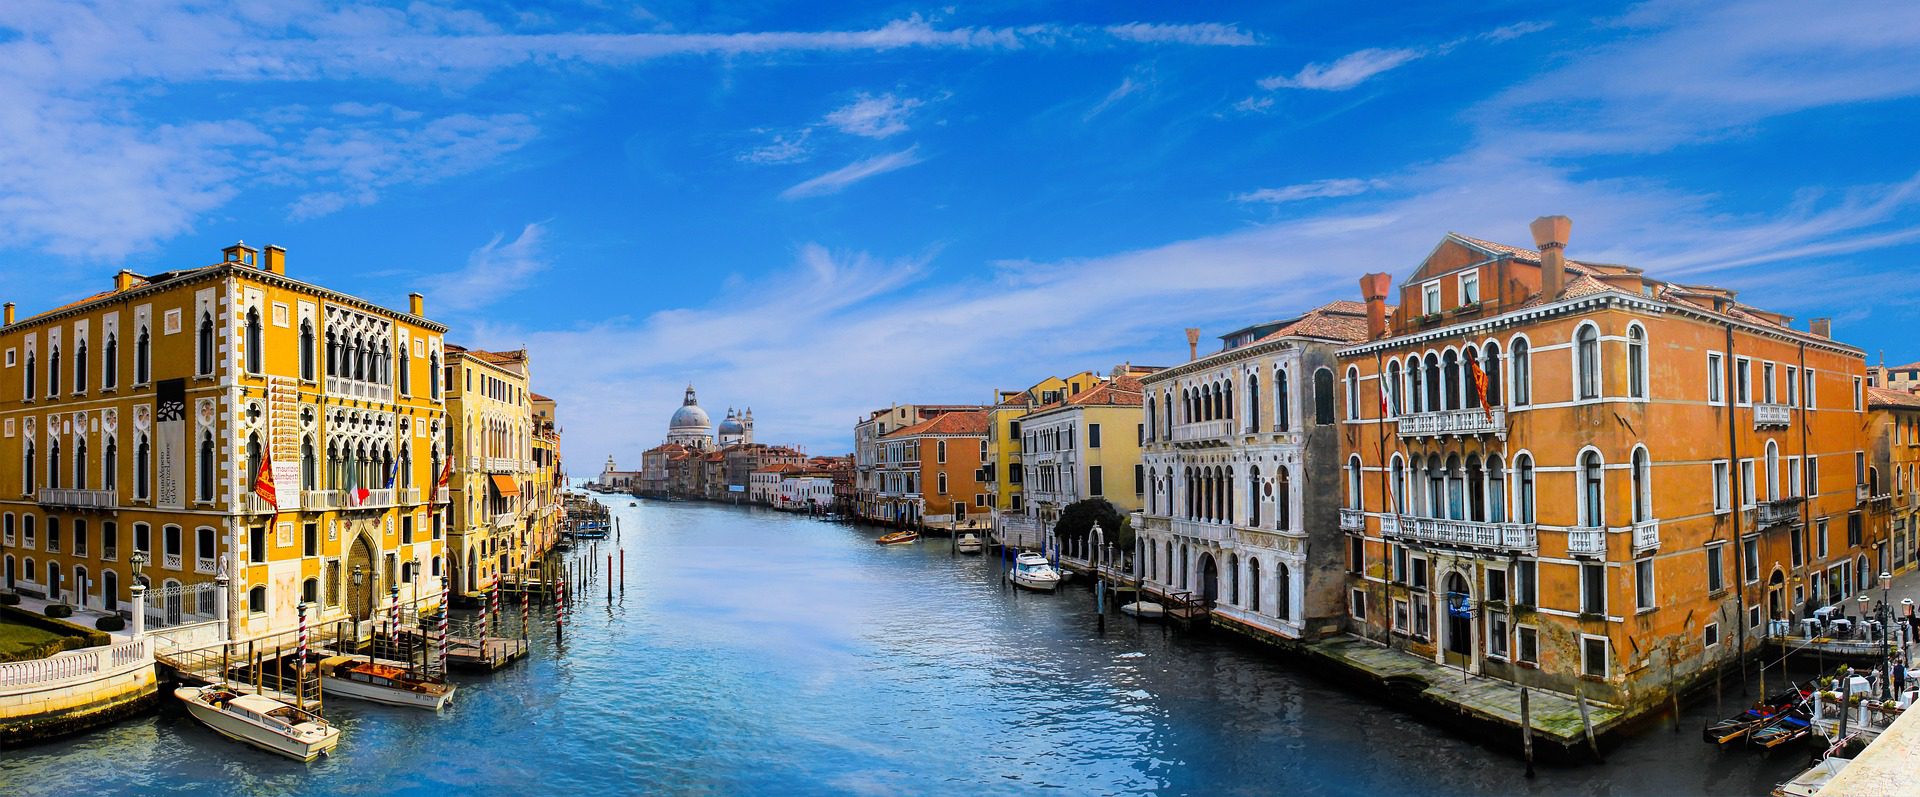 You are currently viewing Discovering the Rich History of Venice: Plan Your Visit to Doge Palace